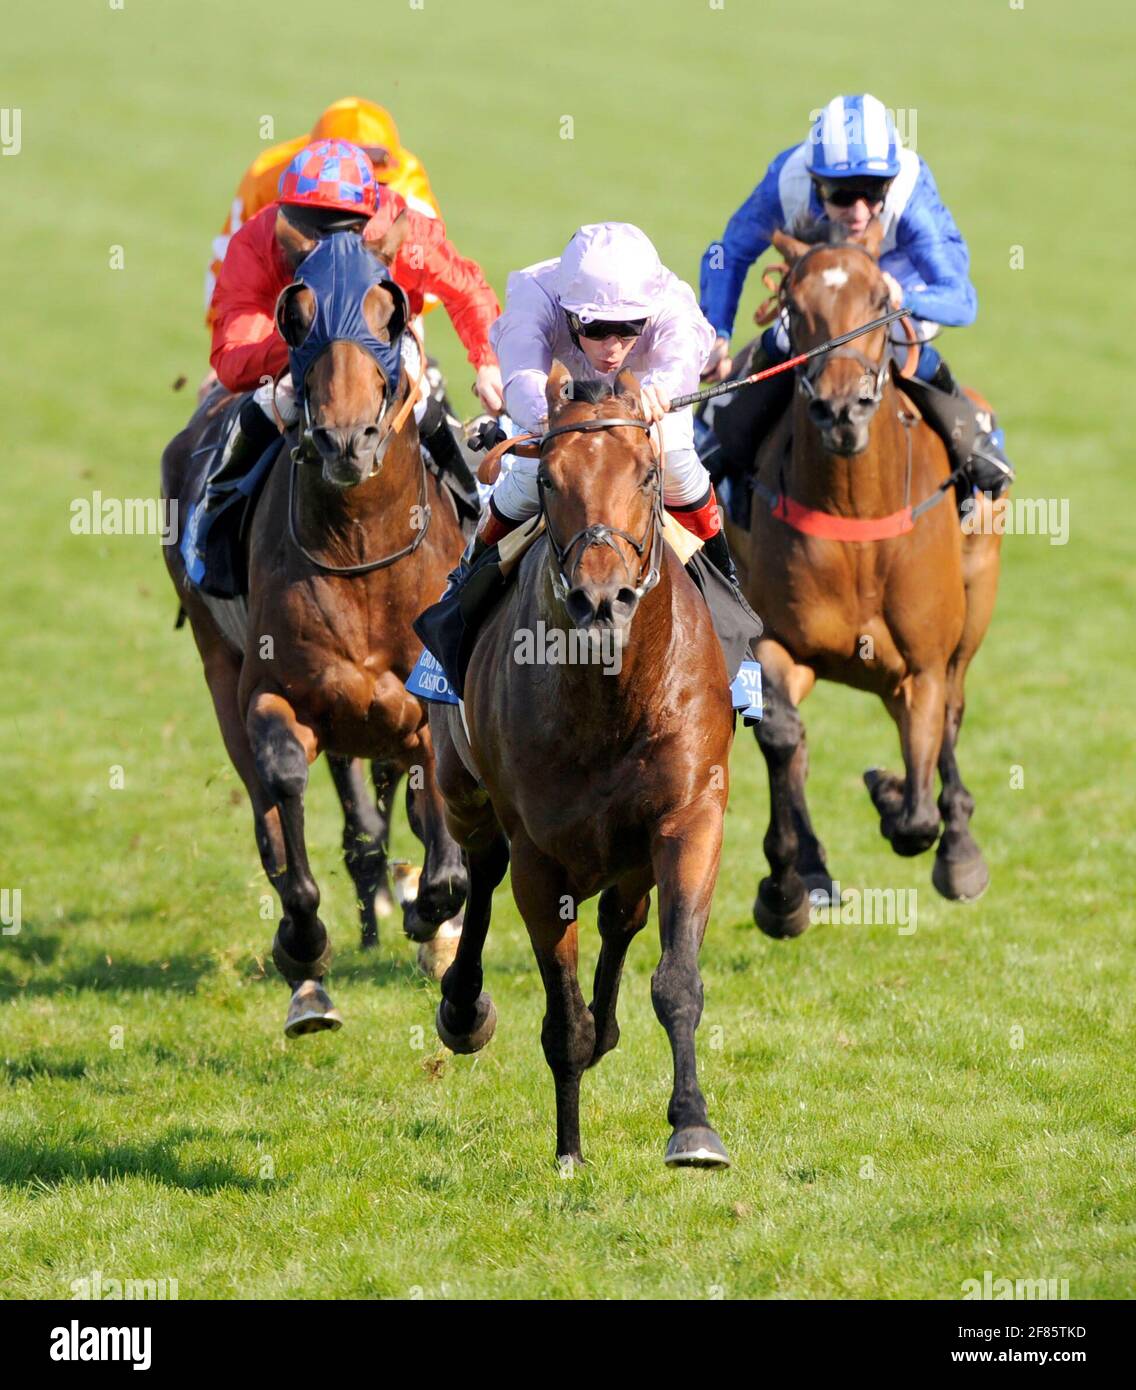 RACING AT ASCOT 28/9/2008. THE GROSVENOR CASINOS CUMBERLAND LODGE STAKES. FRANKIE DETTORI ON SIXTIES ICON ON HIS WAY TO WINNING. PICTURE DAVID ASHDOWN Stock Photo